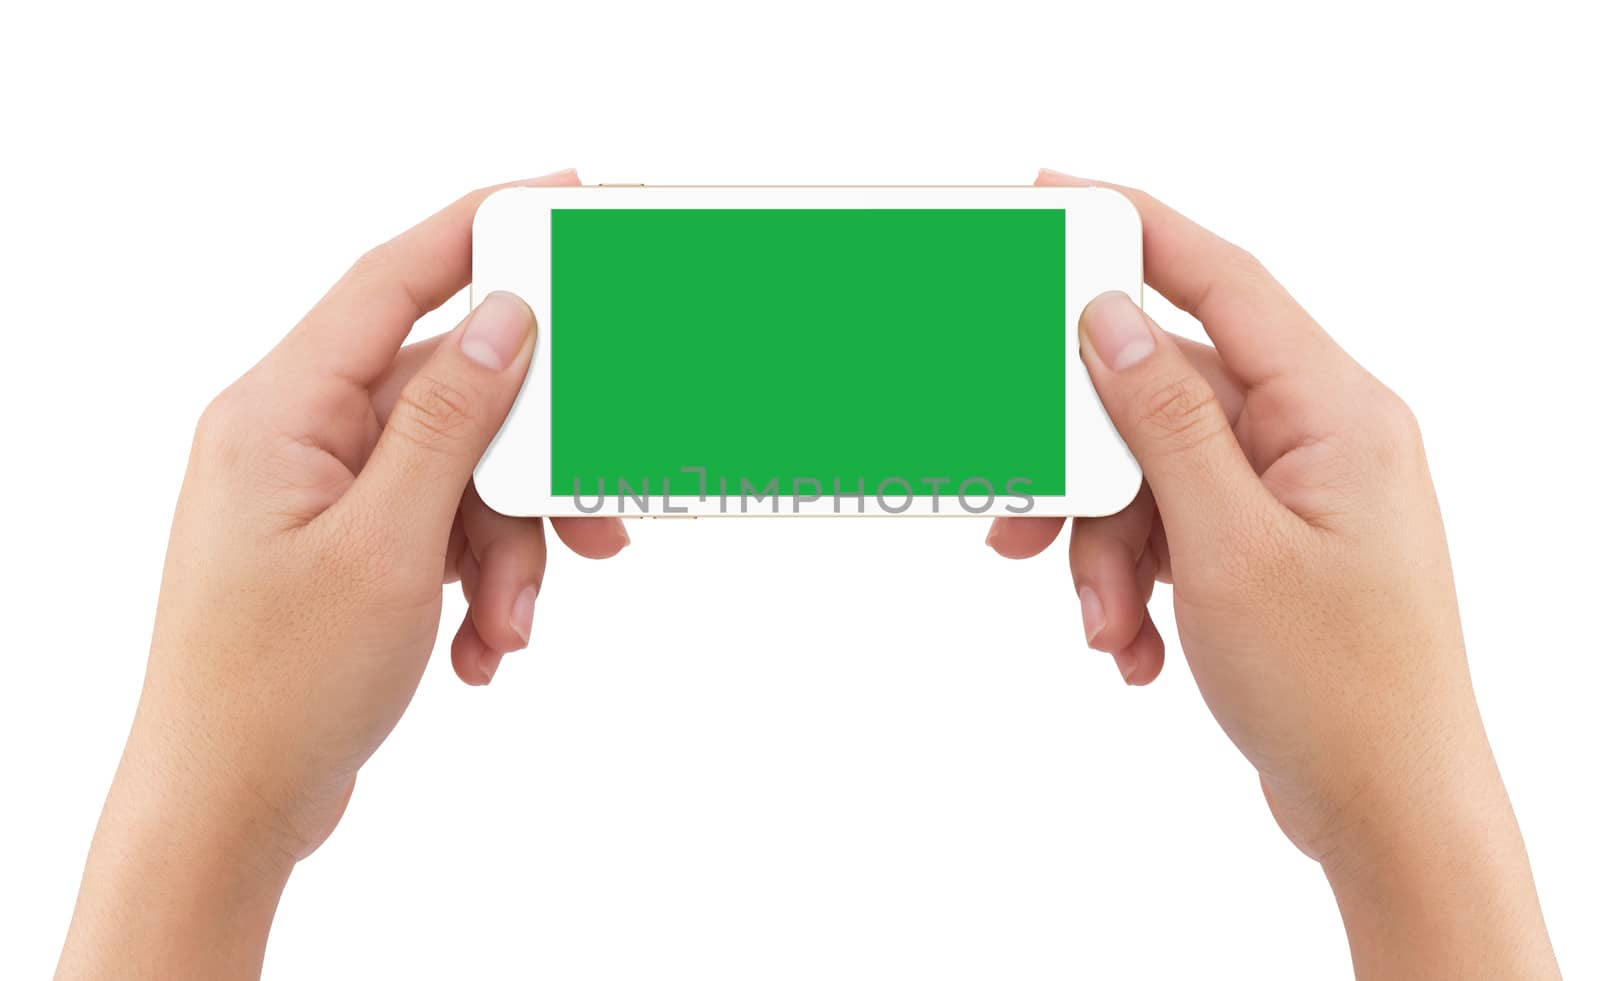 Isolated human two hands holding white mobile computer green screen mockup on white background